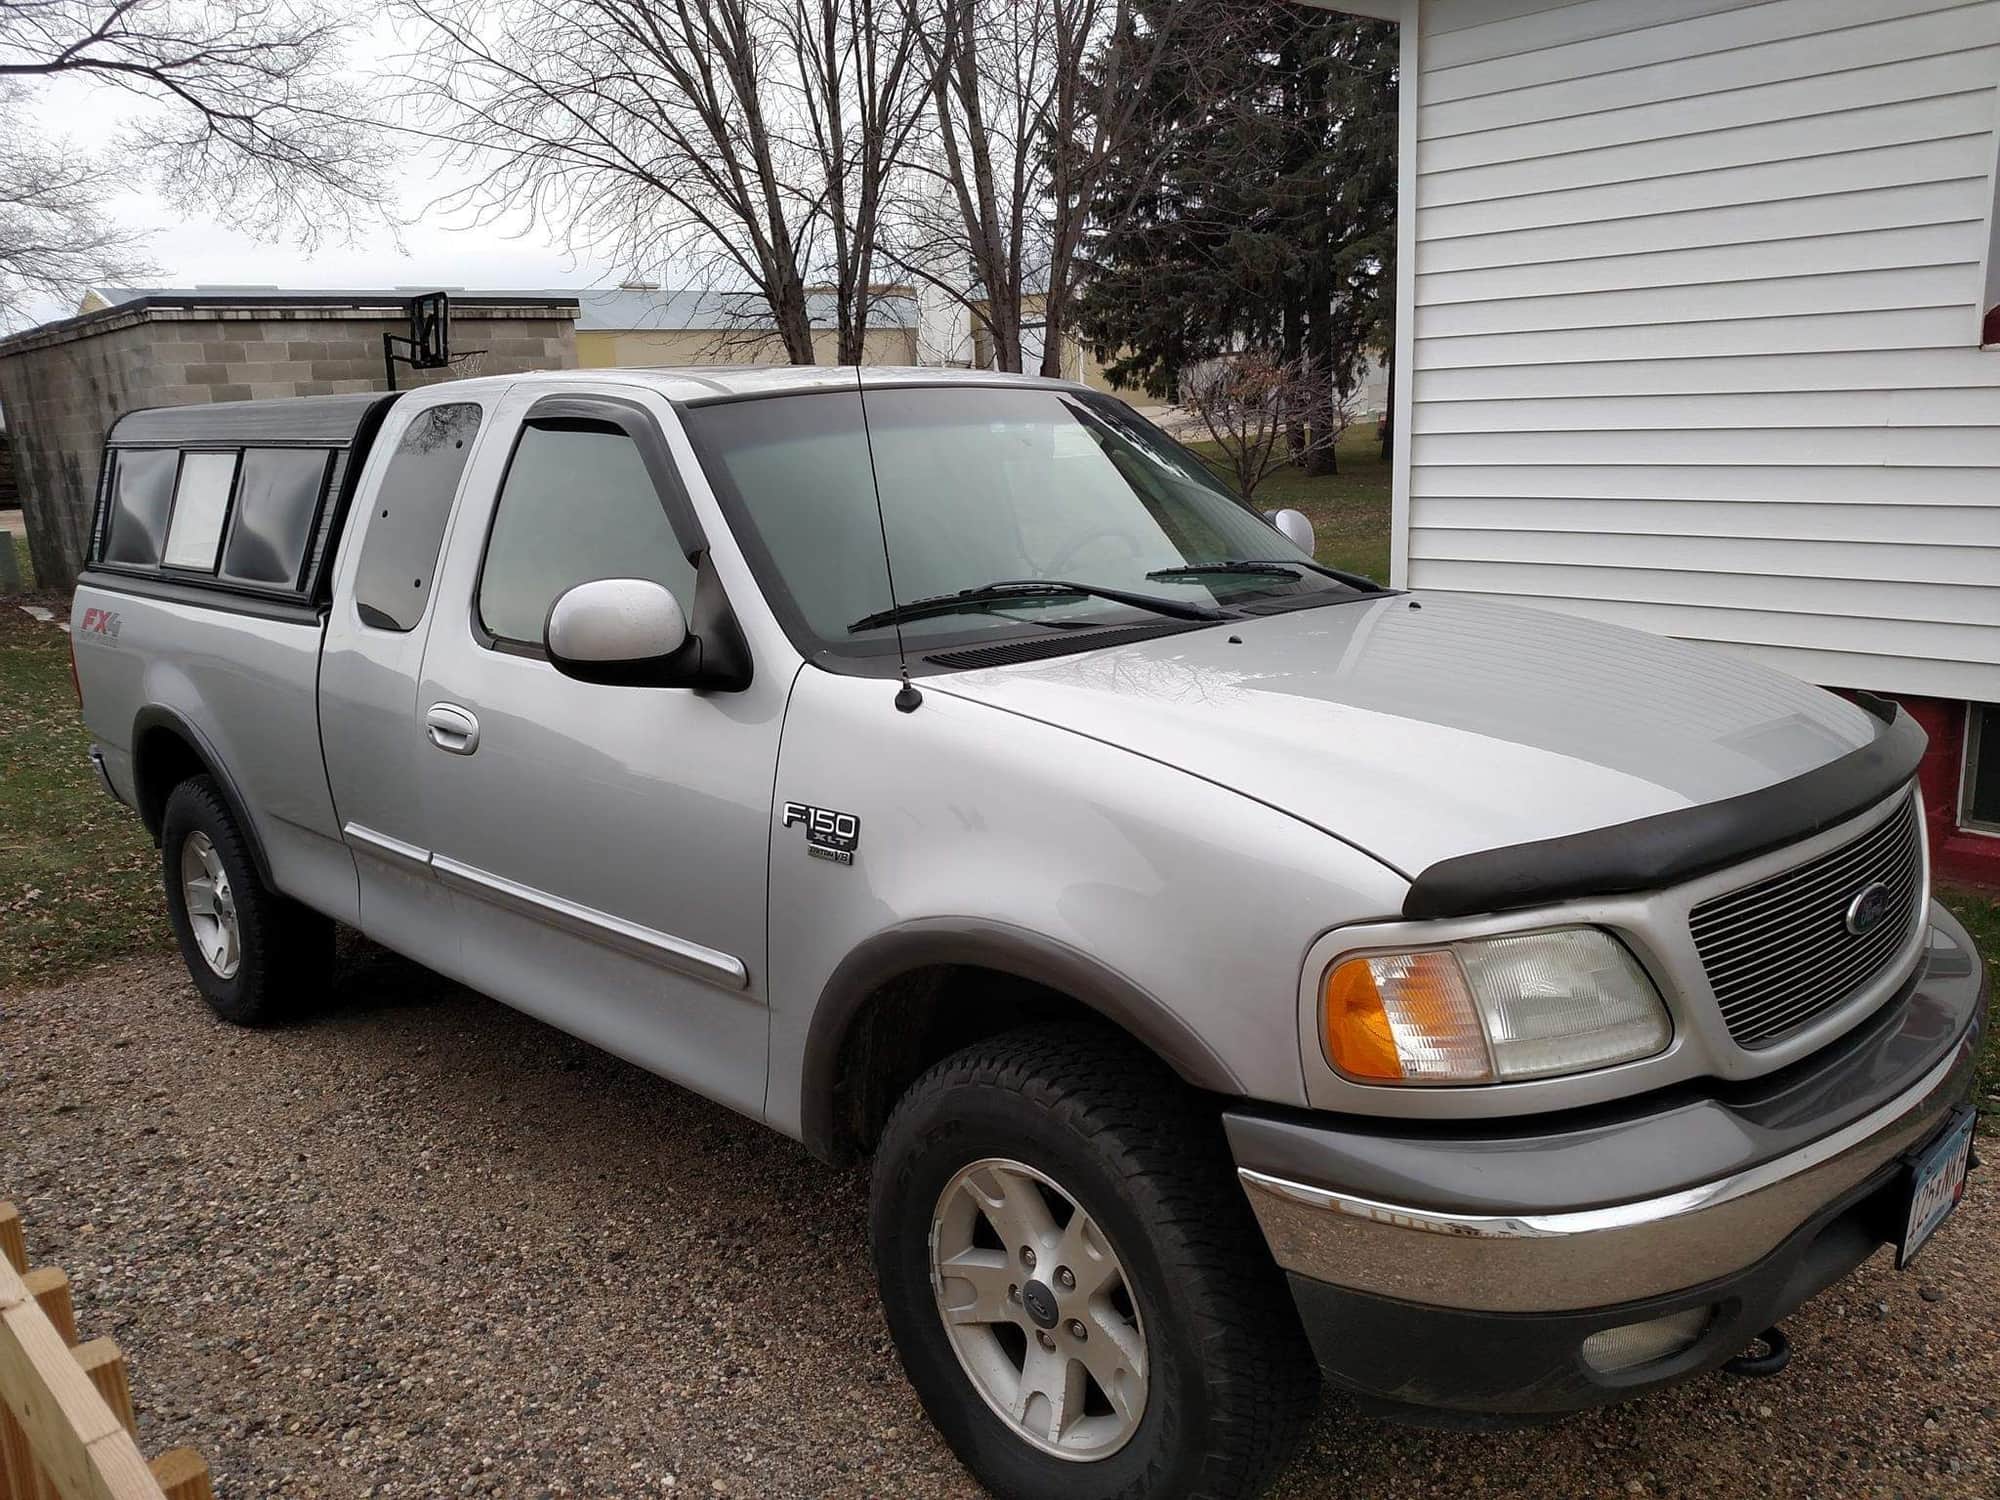 10R80 Fluid? - Page 8 - Ford F150 Forum - Community of Ford Truck Fans